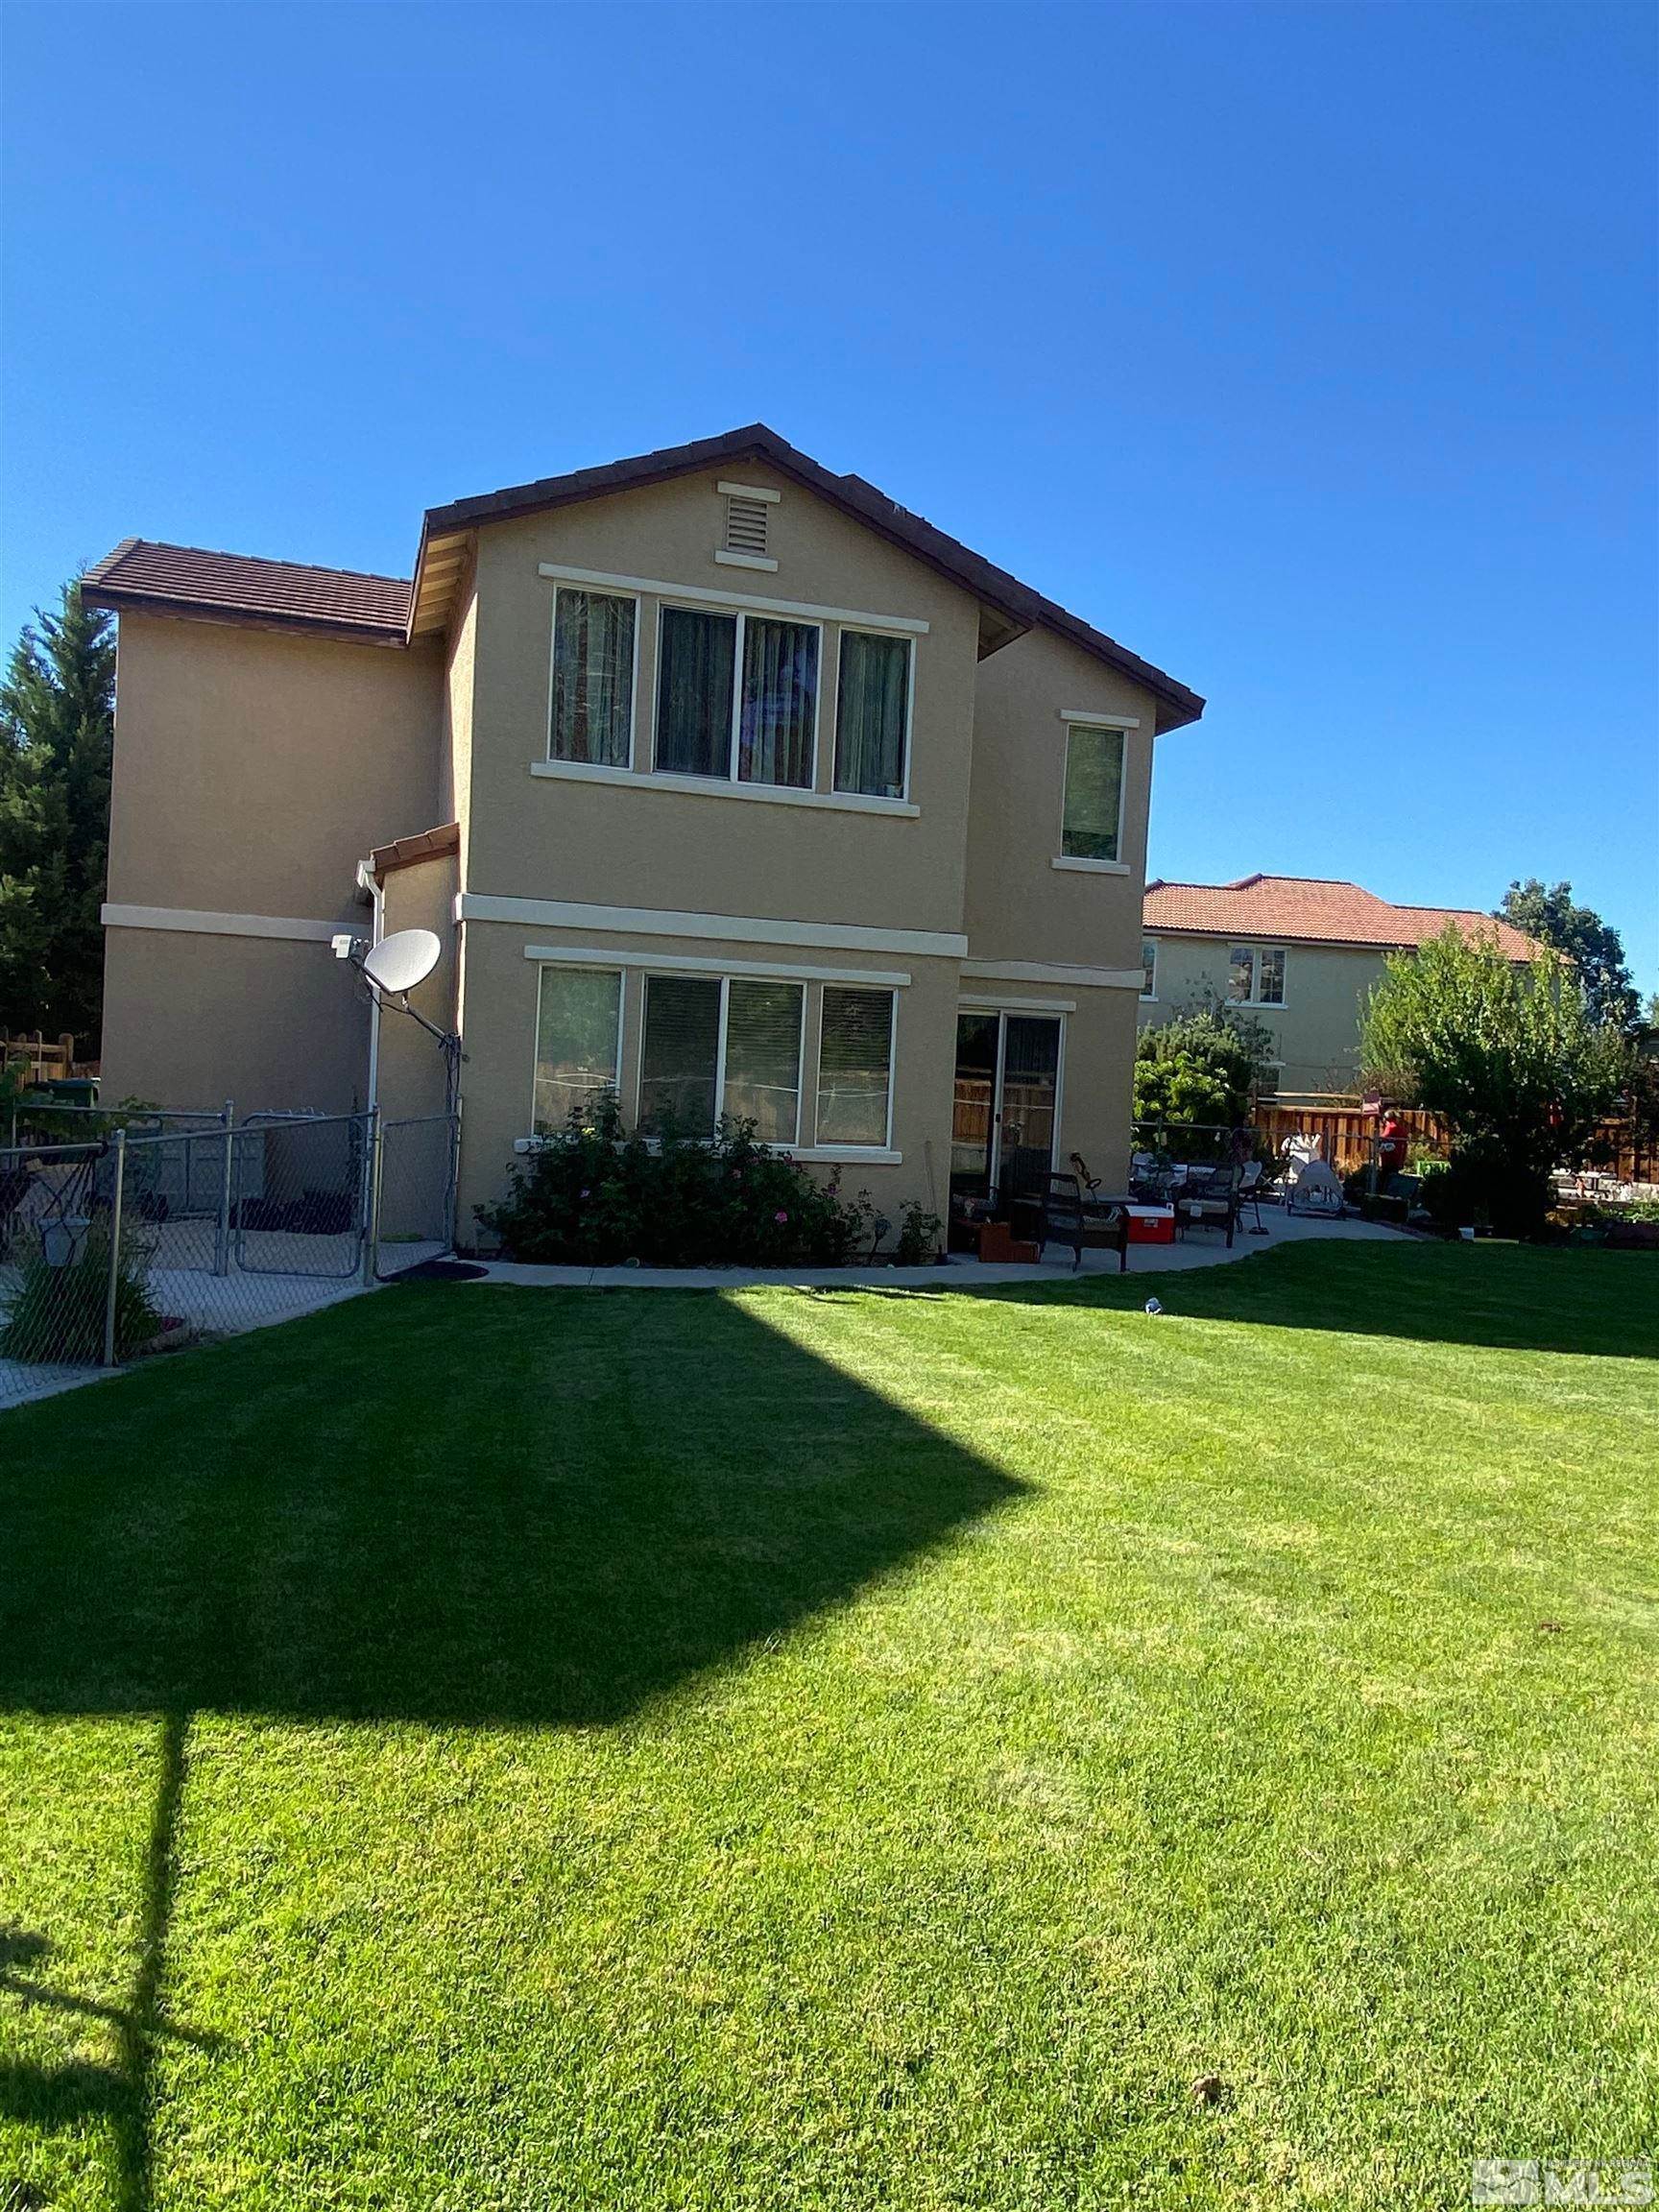 2. Single Family Homes for Active at 3747 Banfi Court Sparks, Nevada 89436 United States